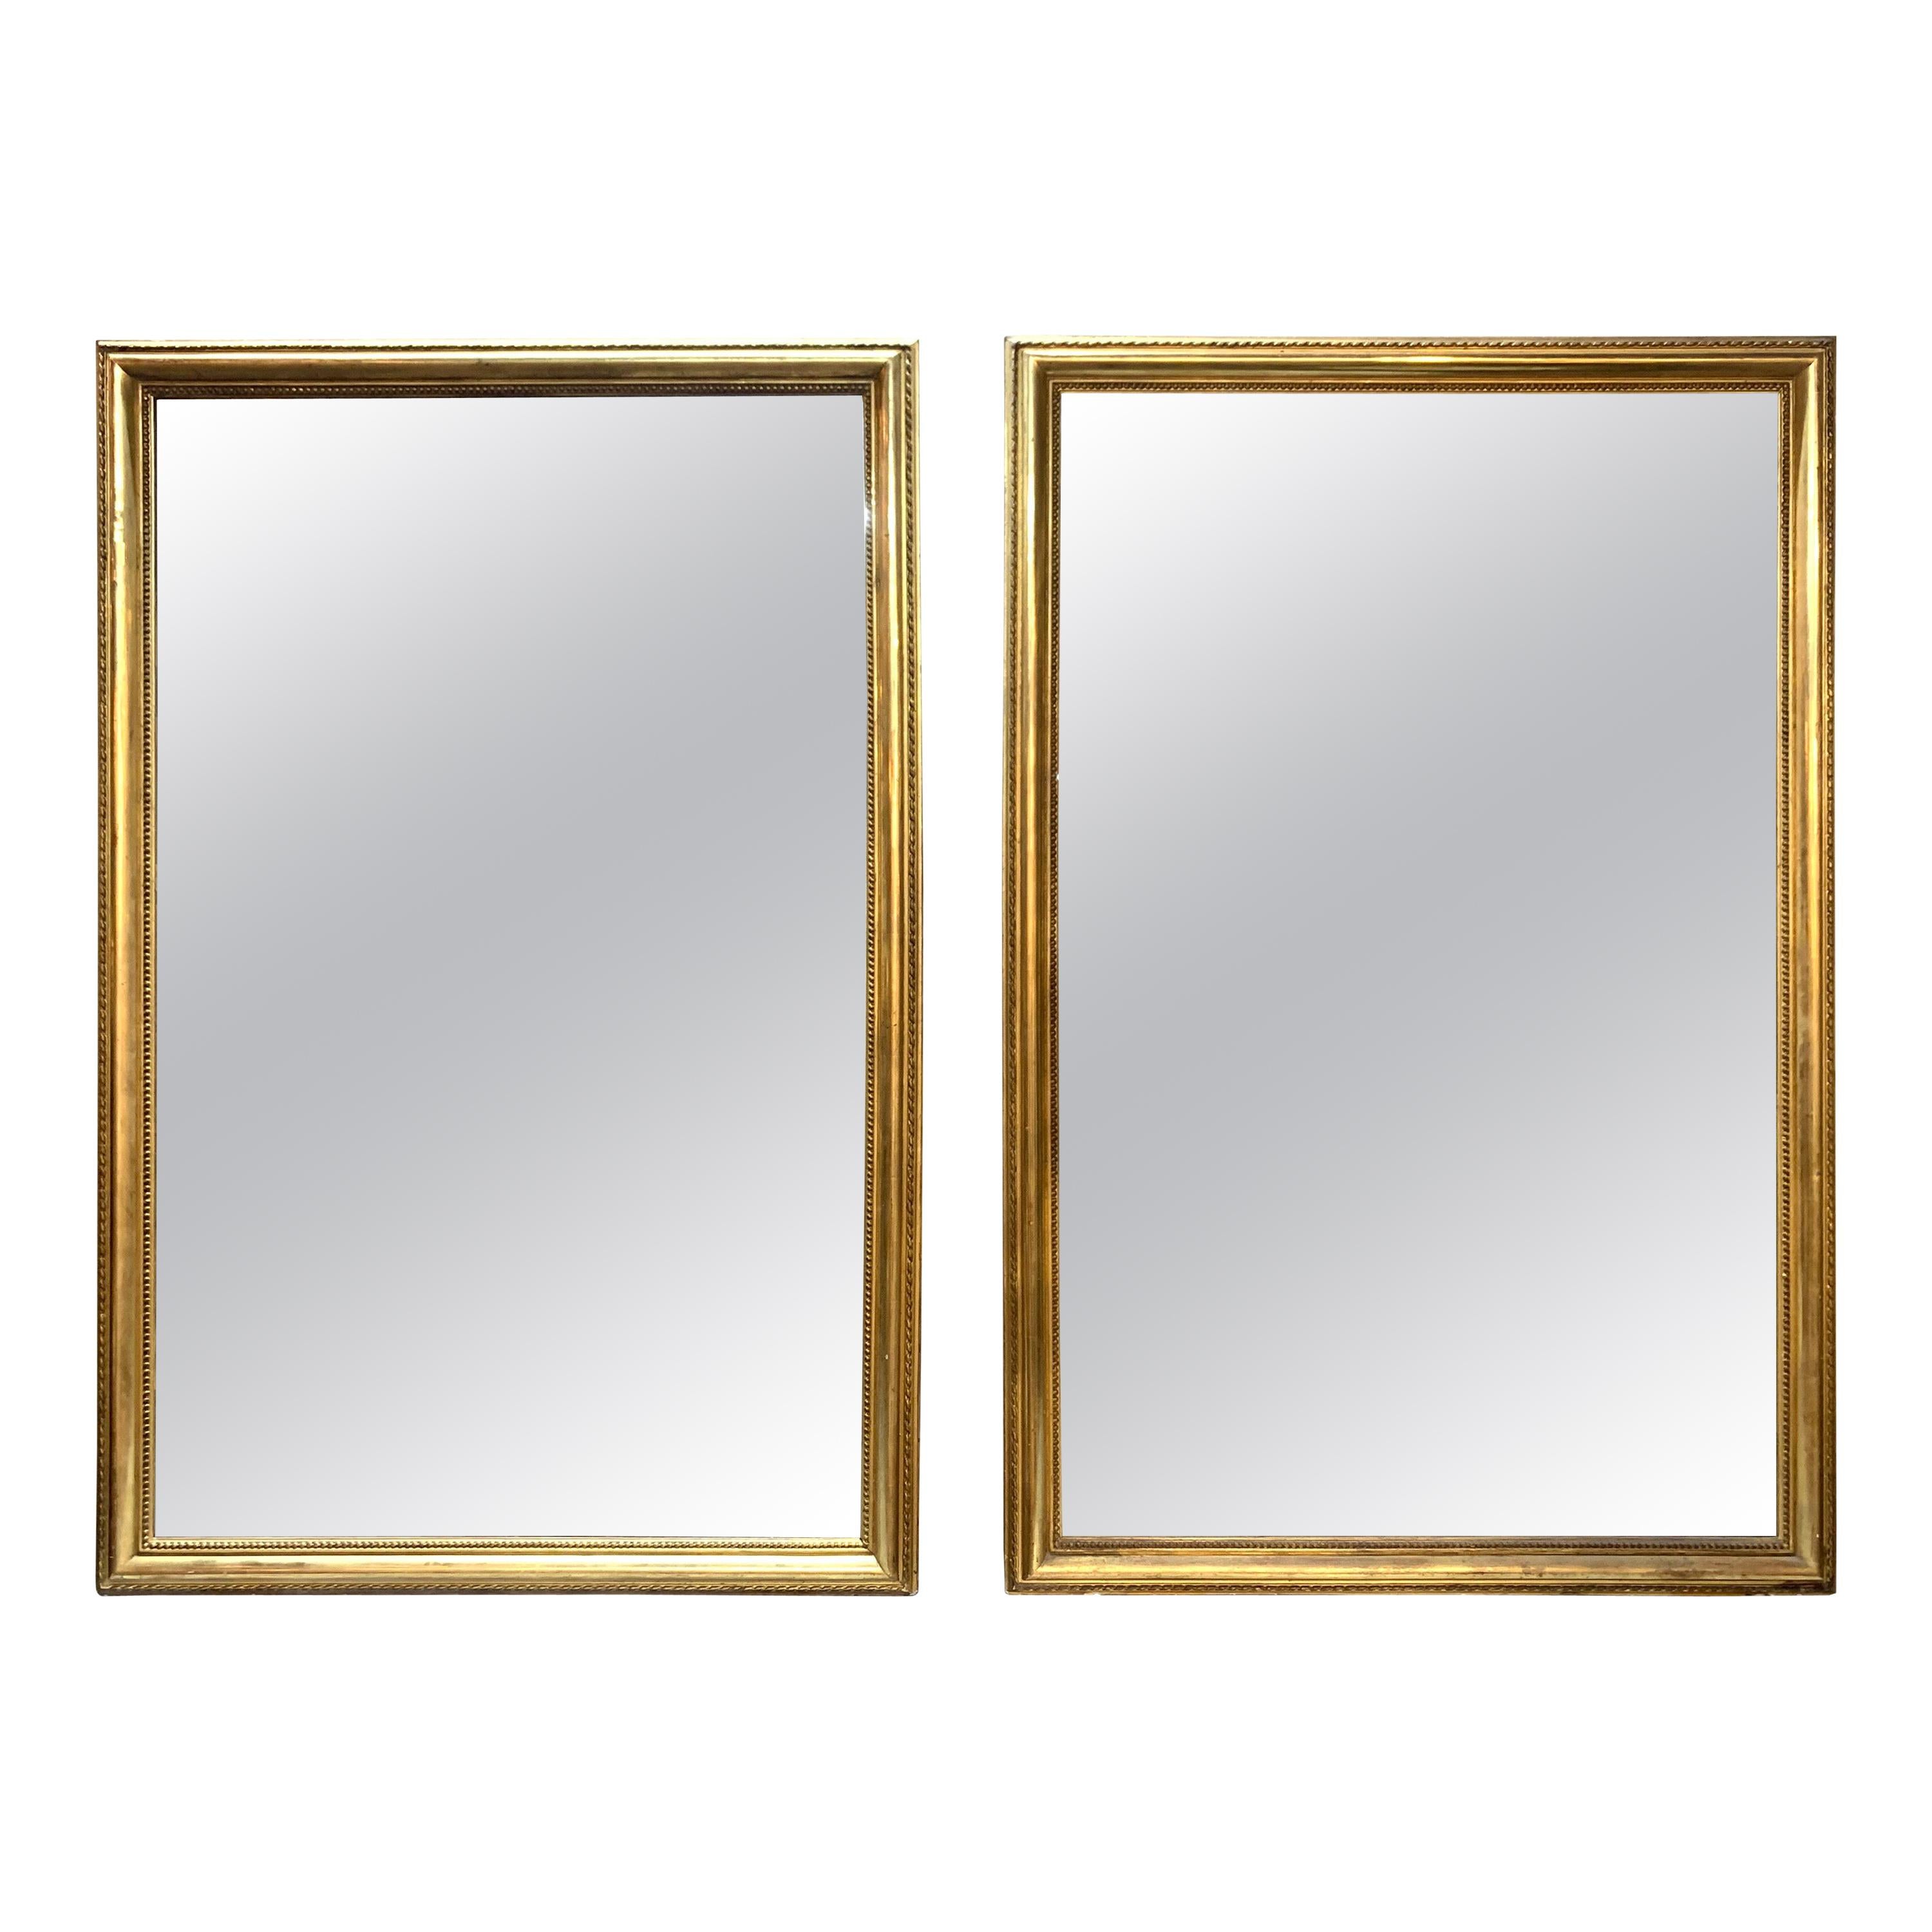 Pair of 19th Century French Directoire Style Giltwood Mirrors